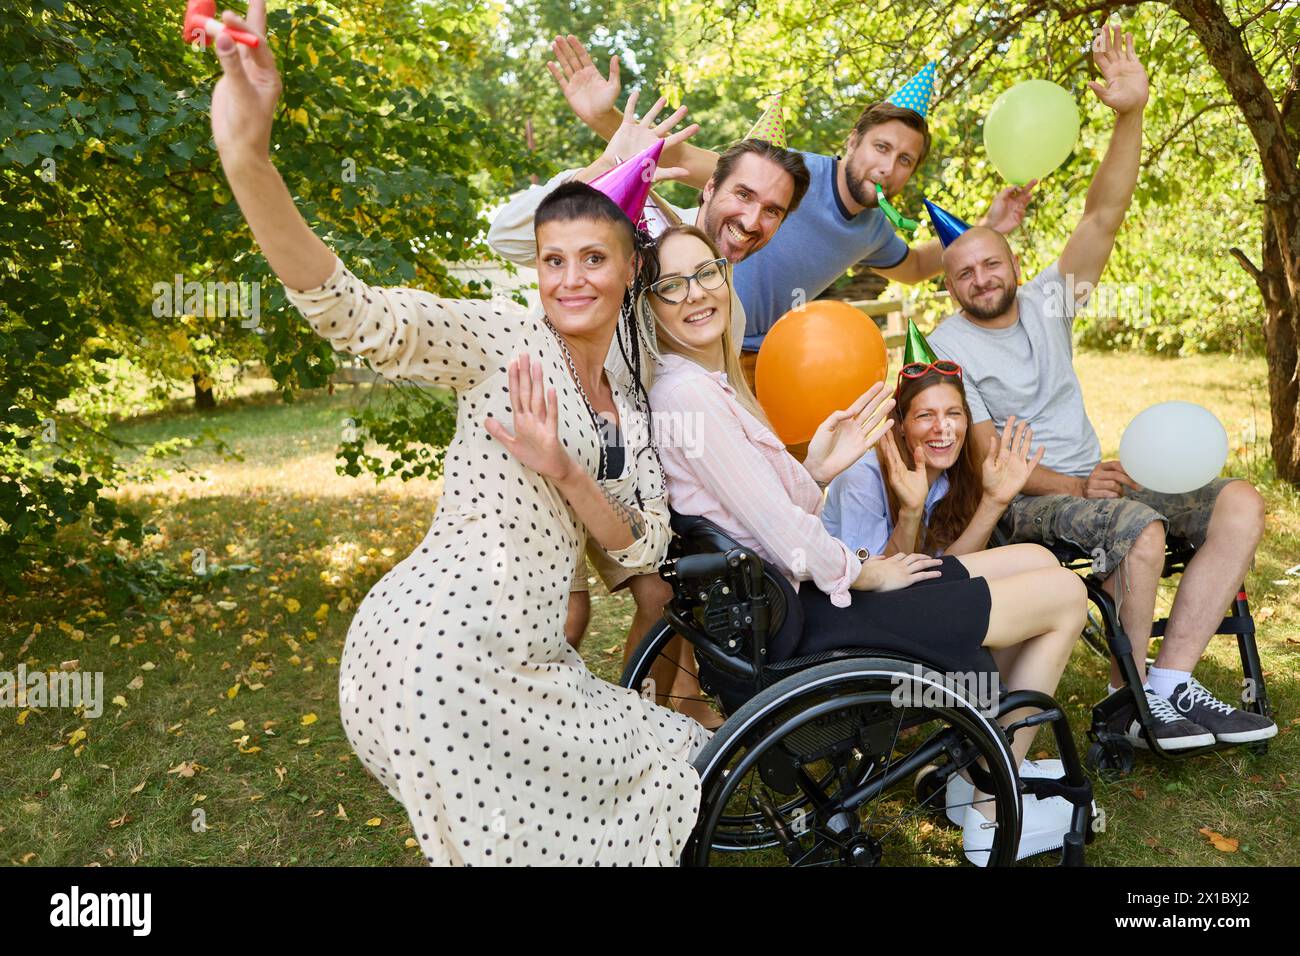 A joyous outdoor birthday celebration featuring a group of diverse friends, including a woman using a wheelchair, all enjoying with balloons and party Stock Photo